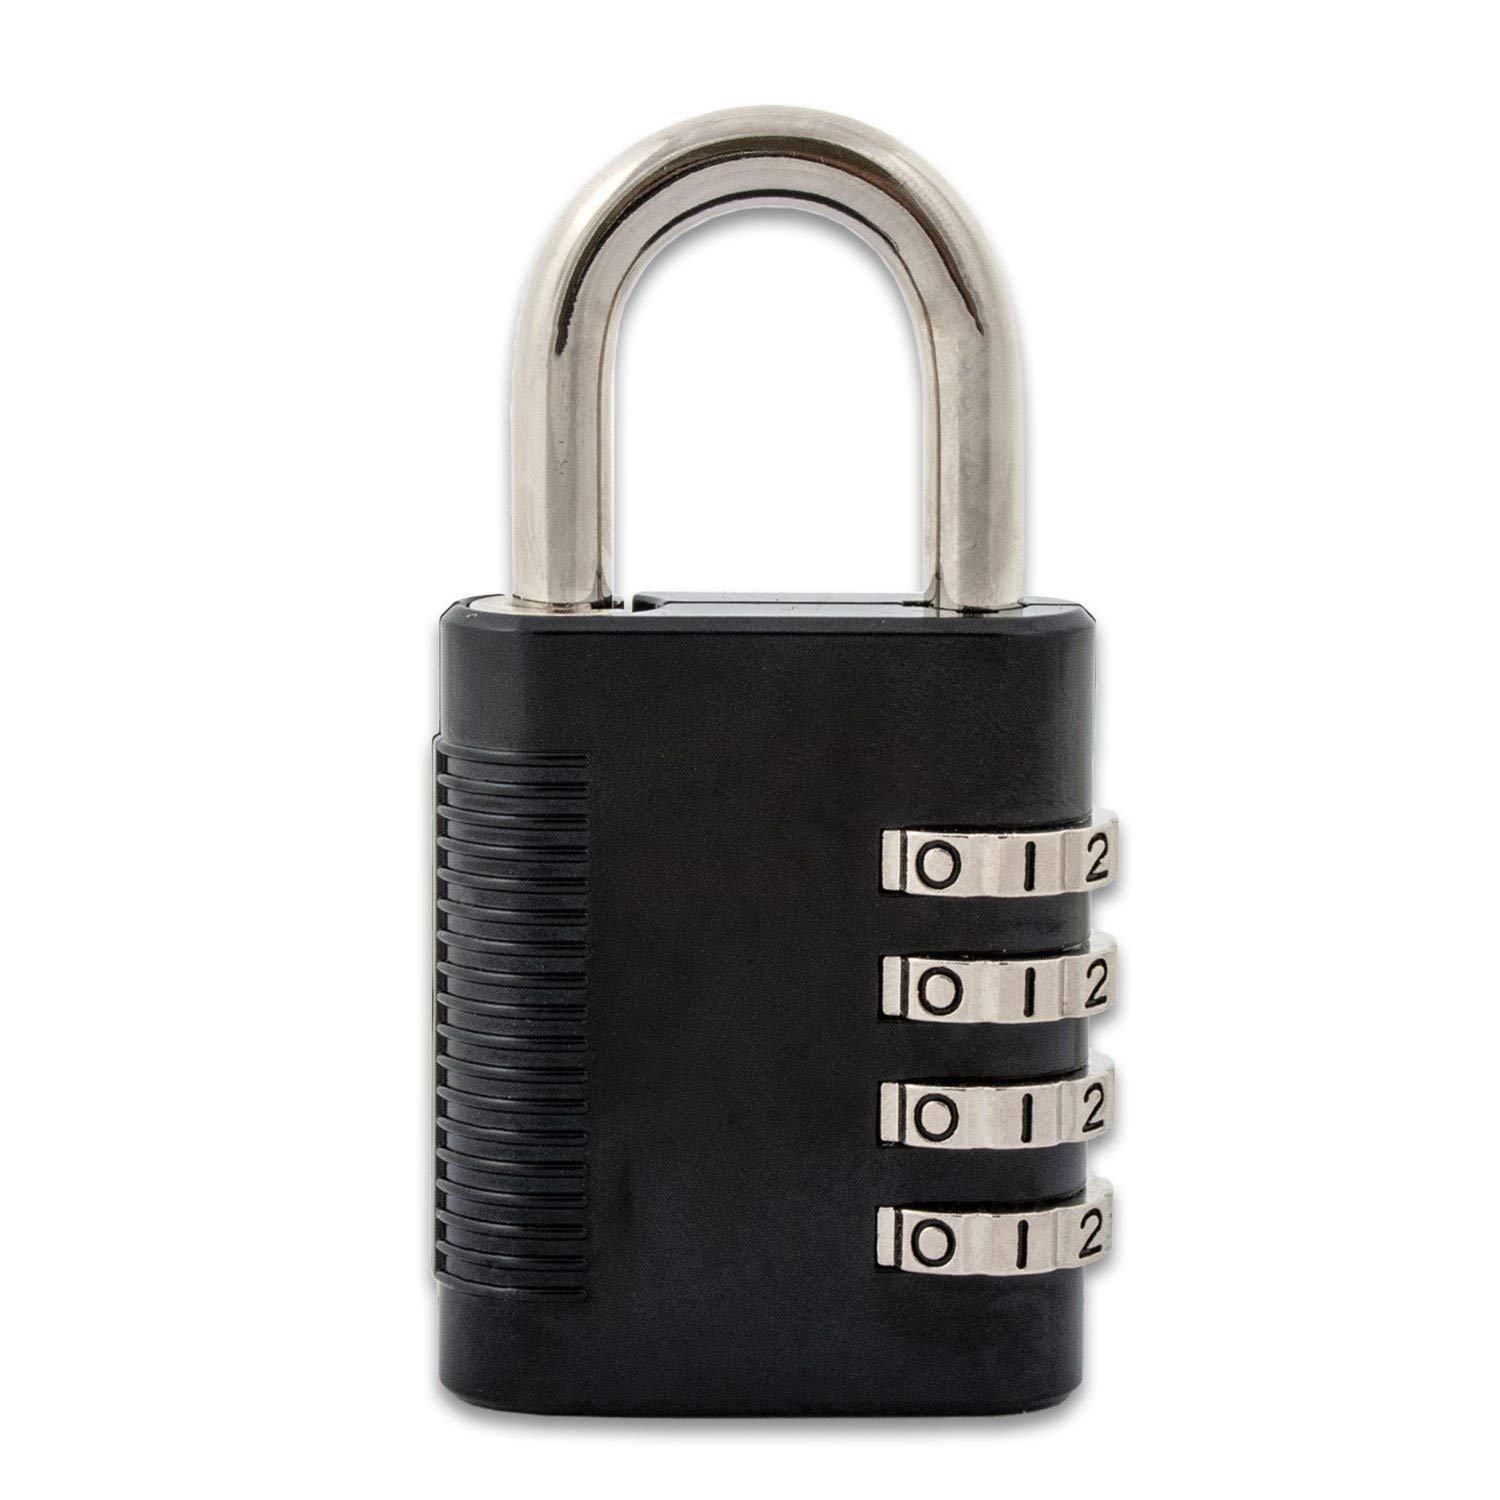 FJM Security SX-575 Combination Padlock with Key Override and Code ...